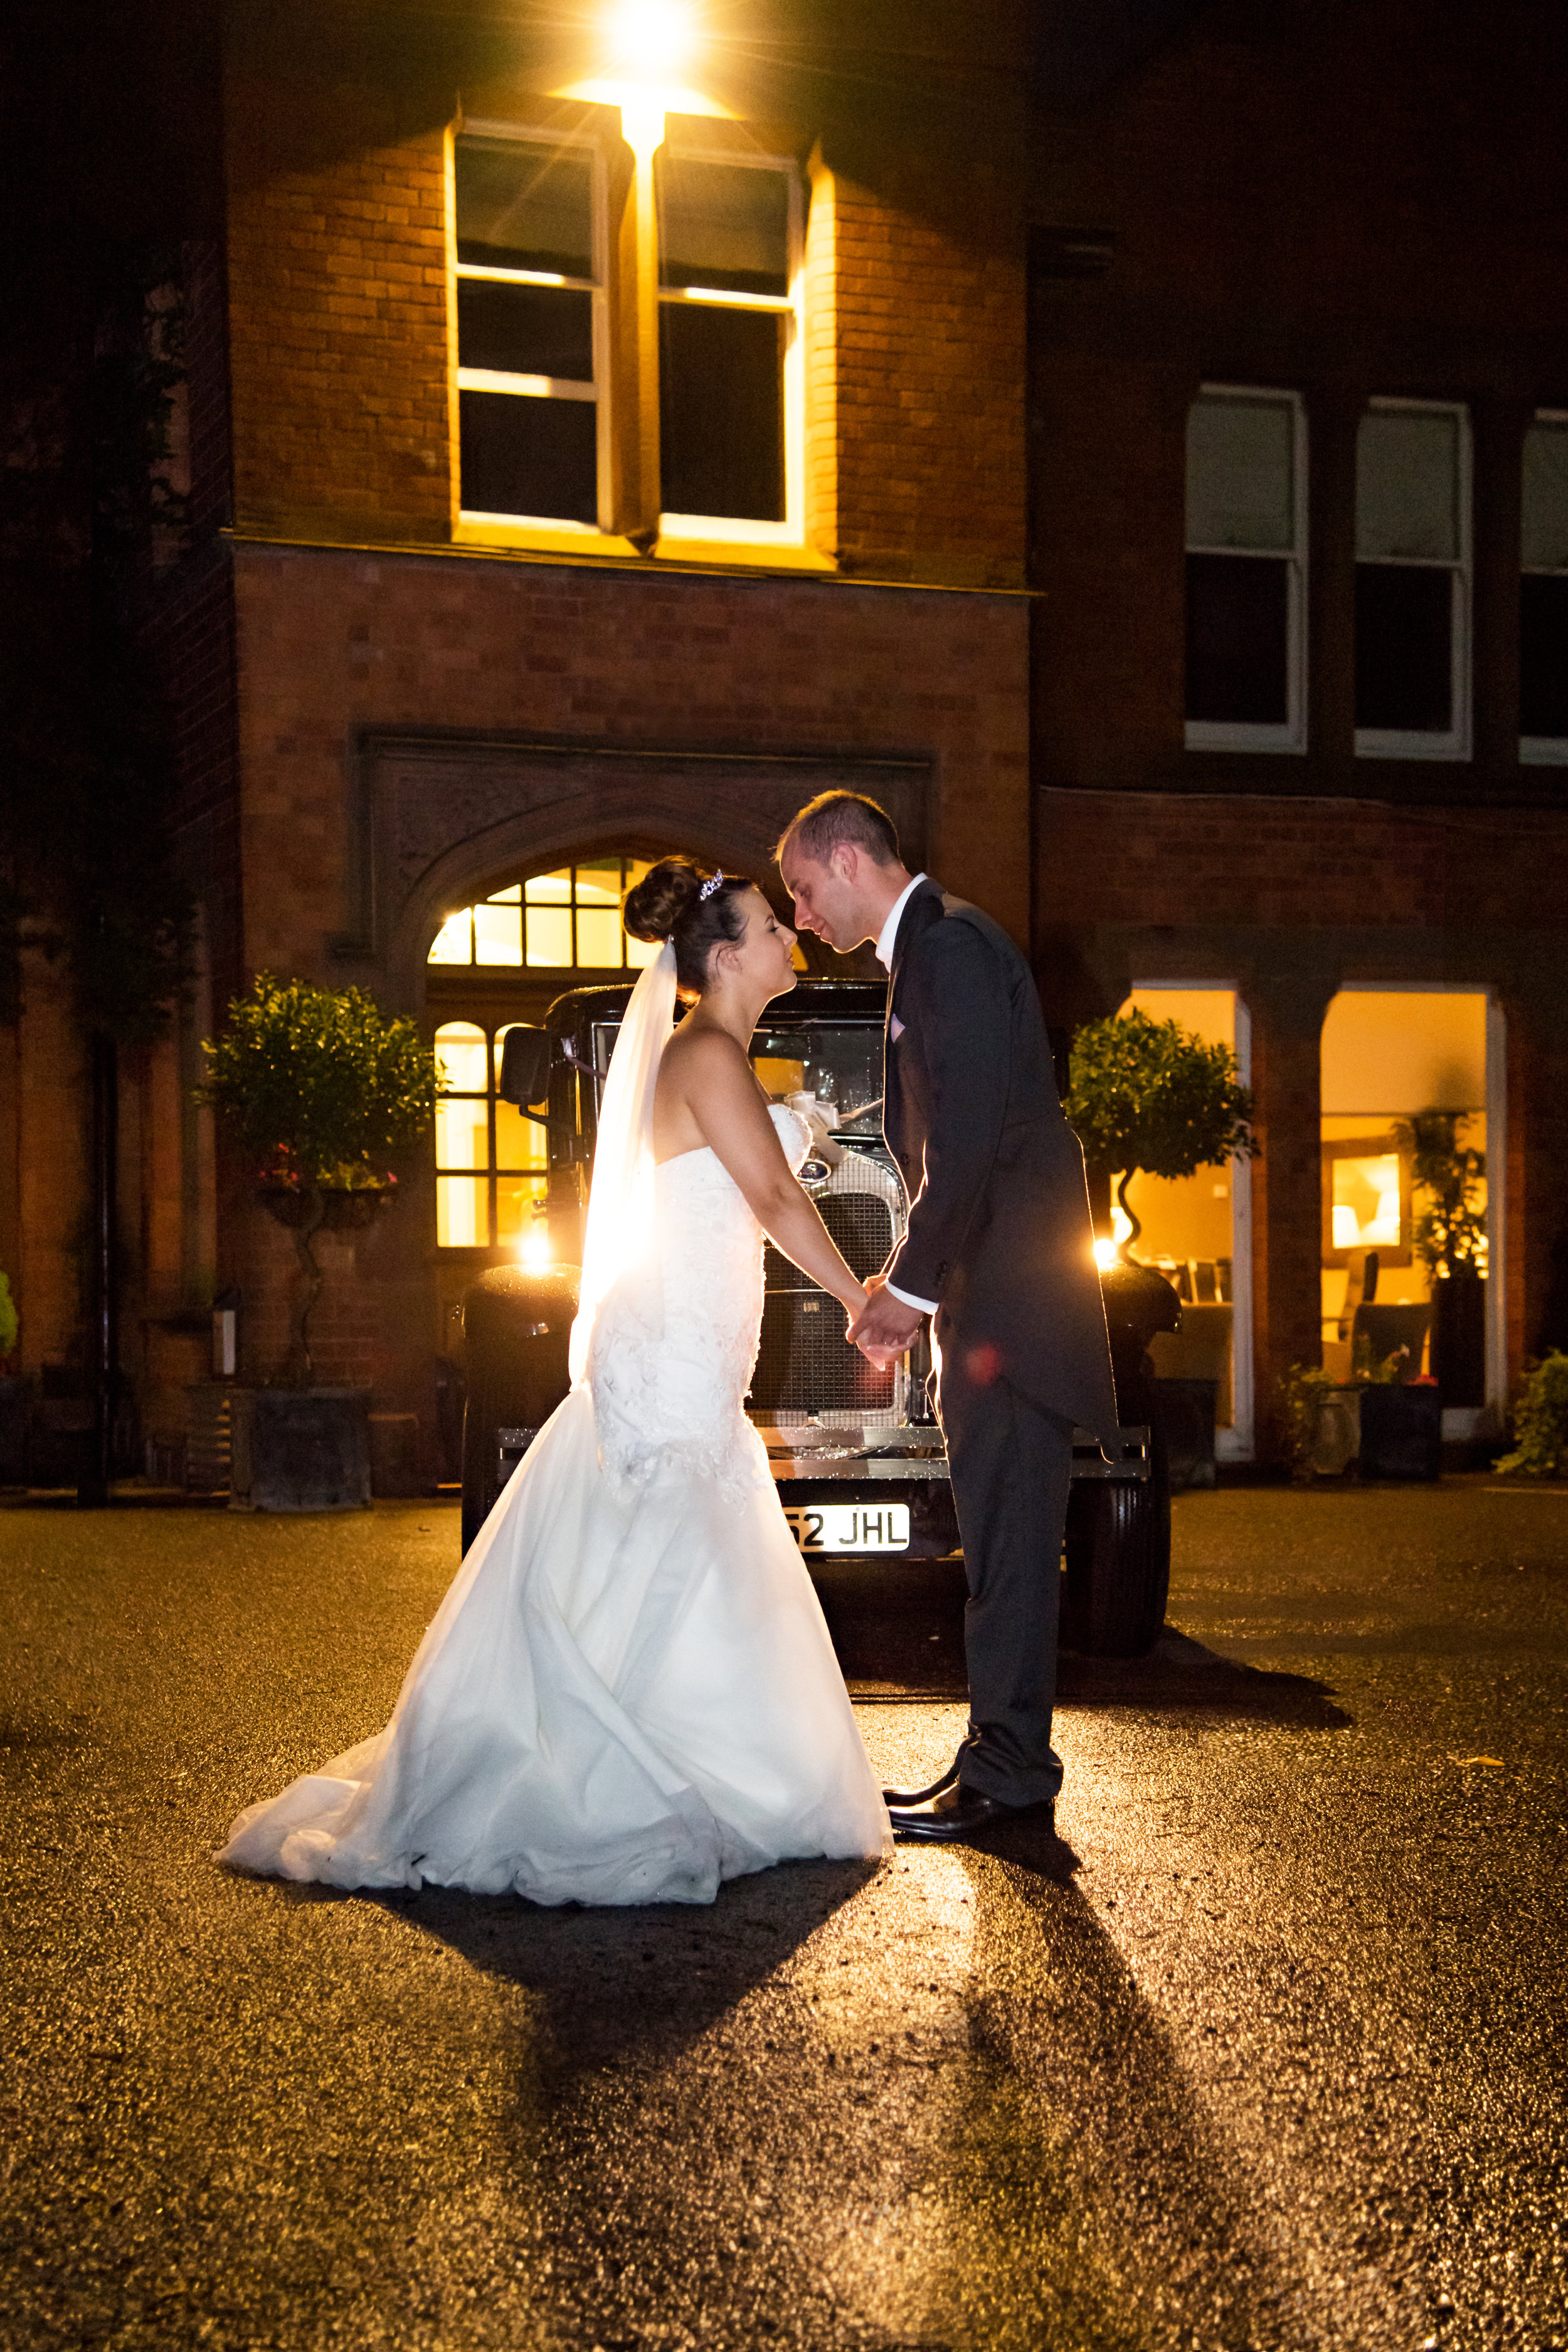 Last kiss of the evening at Woodside Hotel Kenilworth